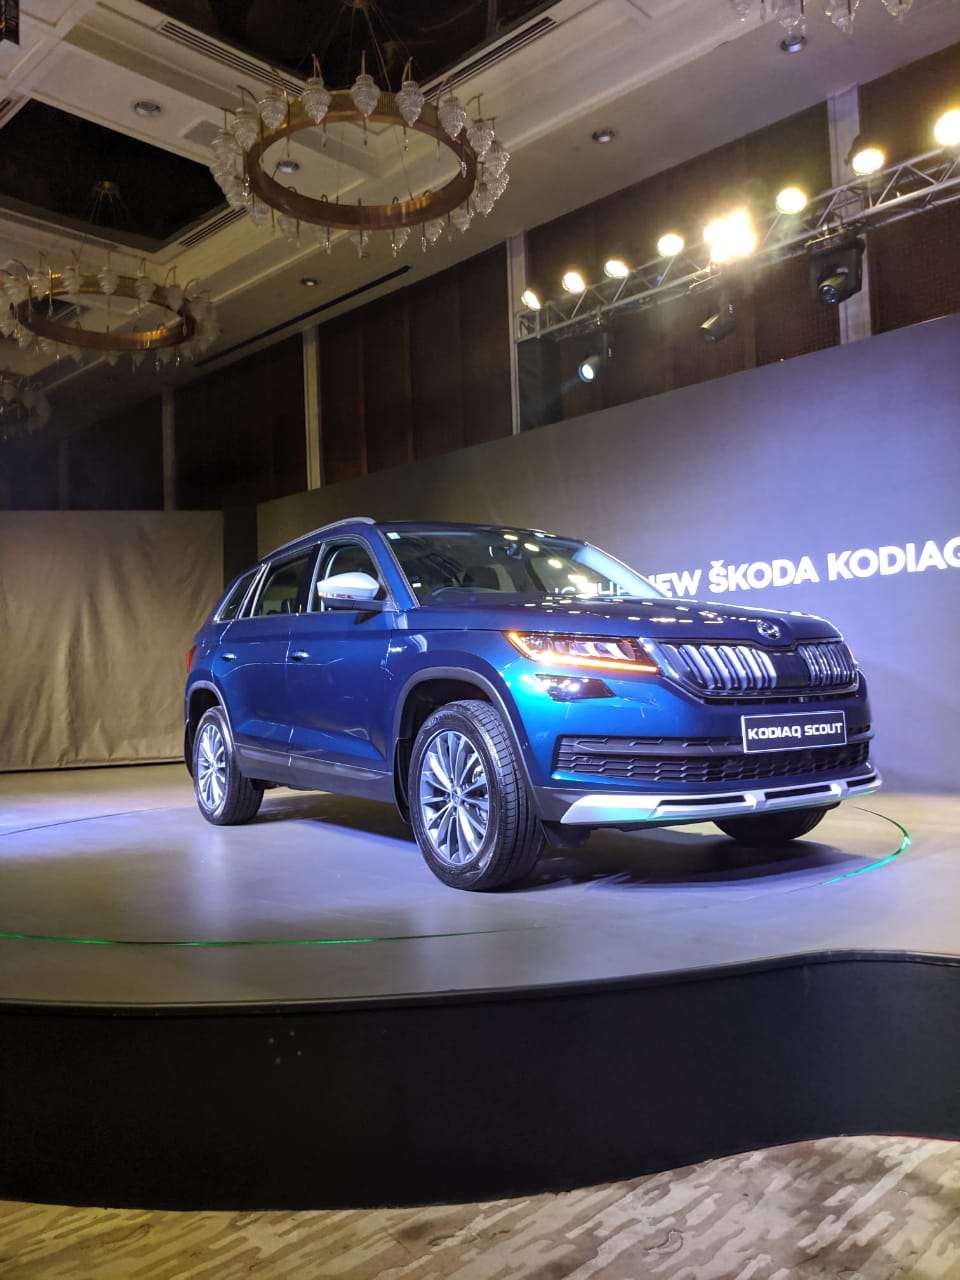 <p>Launched! The Kodiaq Scout is priced at Rs 33.99 lakh, ex-showroom, fitting in between the Style (at Rs 32.99 lakh) and L&amp;K variant (at Rs 36.8 lakh)&nbsp;</p>